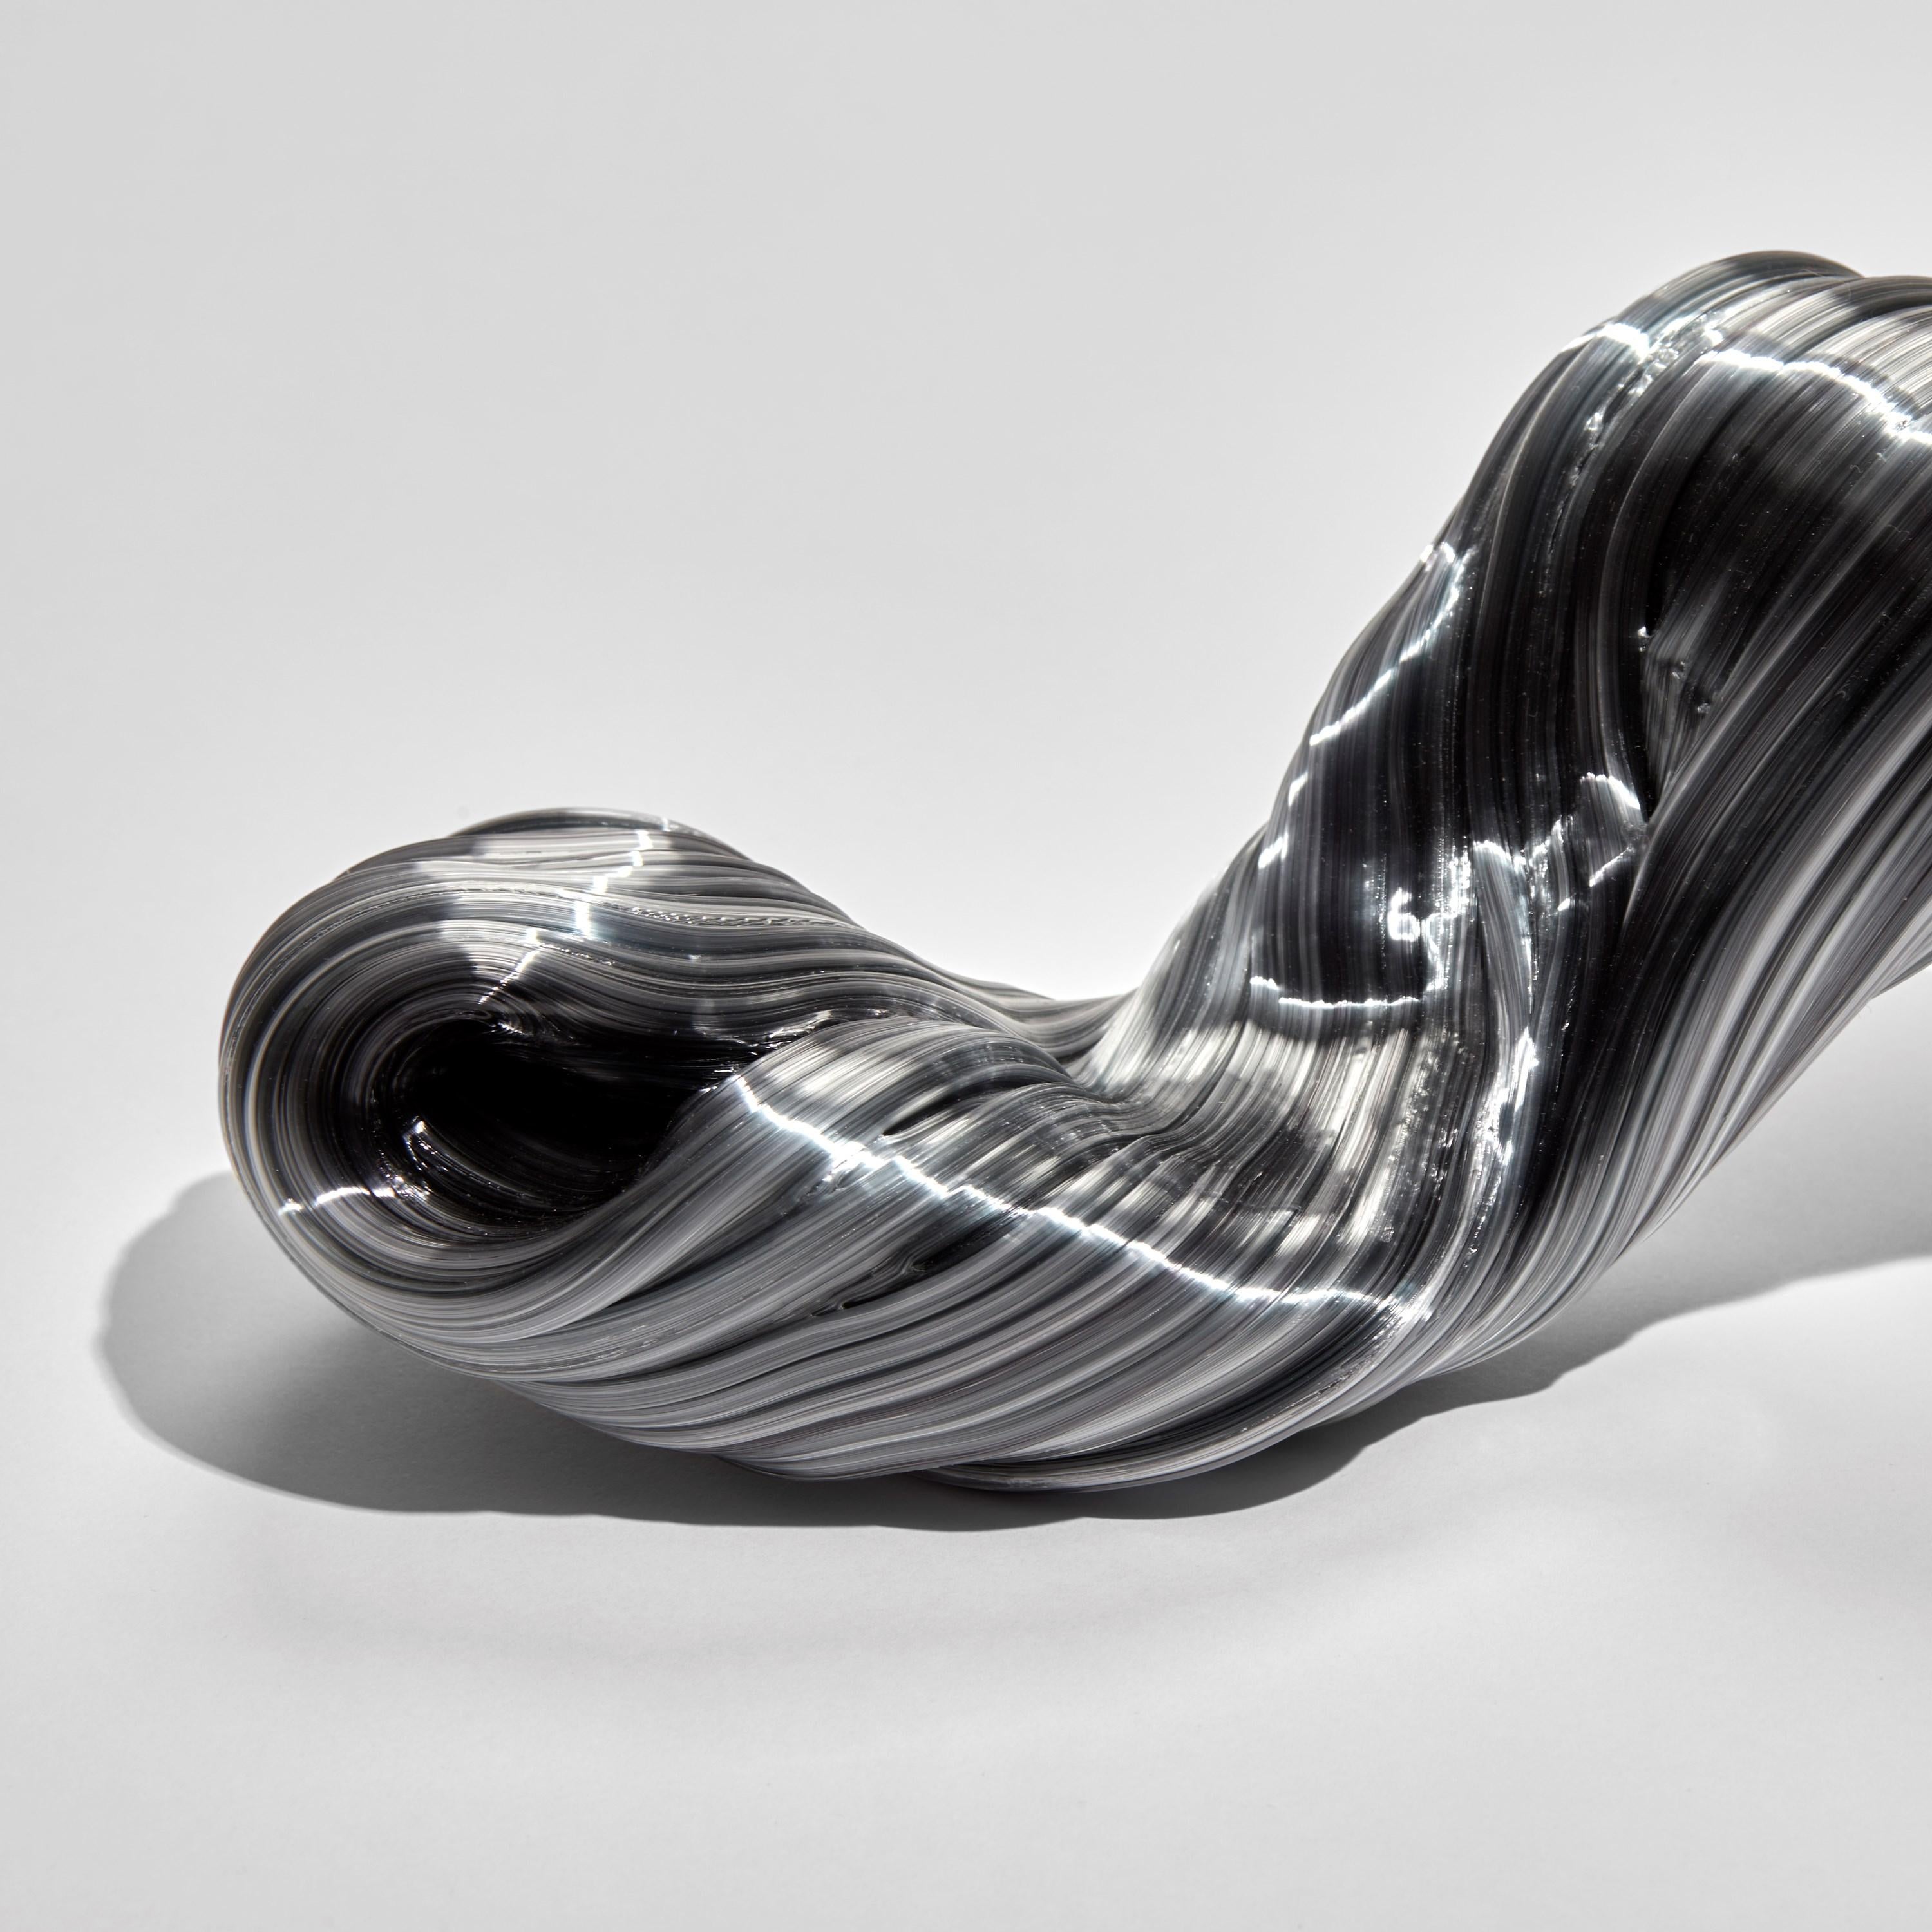 Swedish Nonlinear in Black, a Unique Abstract Glass Sculpture by Maria Bang Espersen For Sale